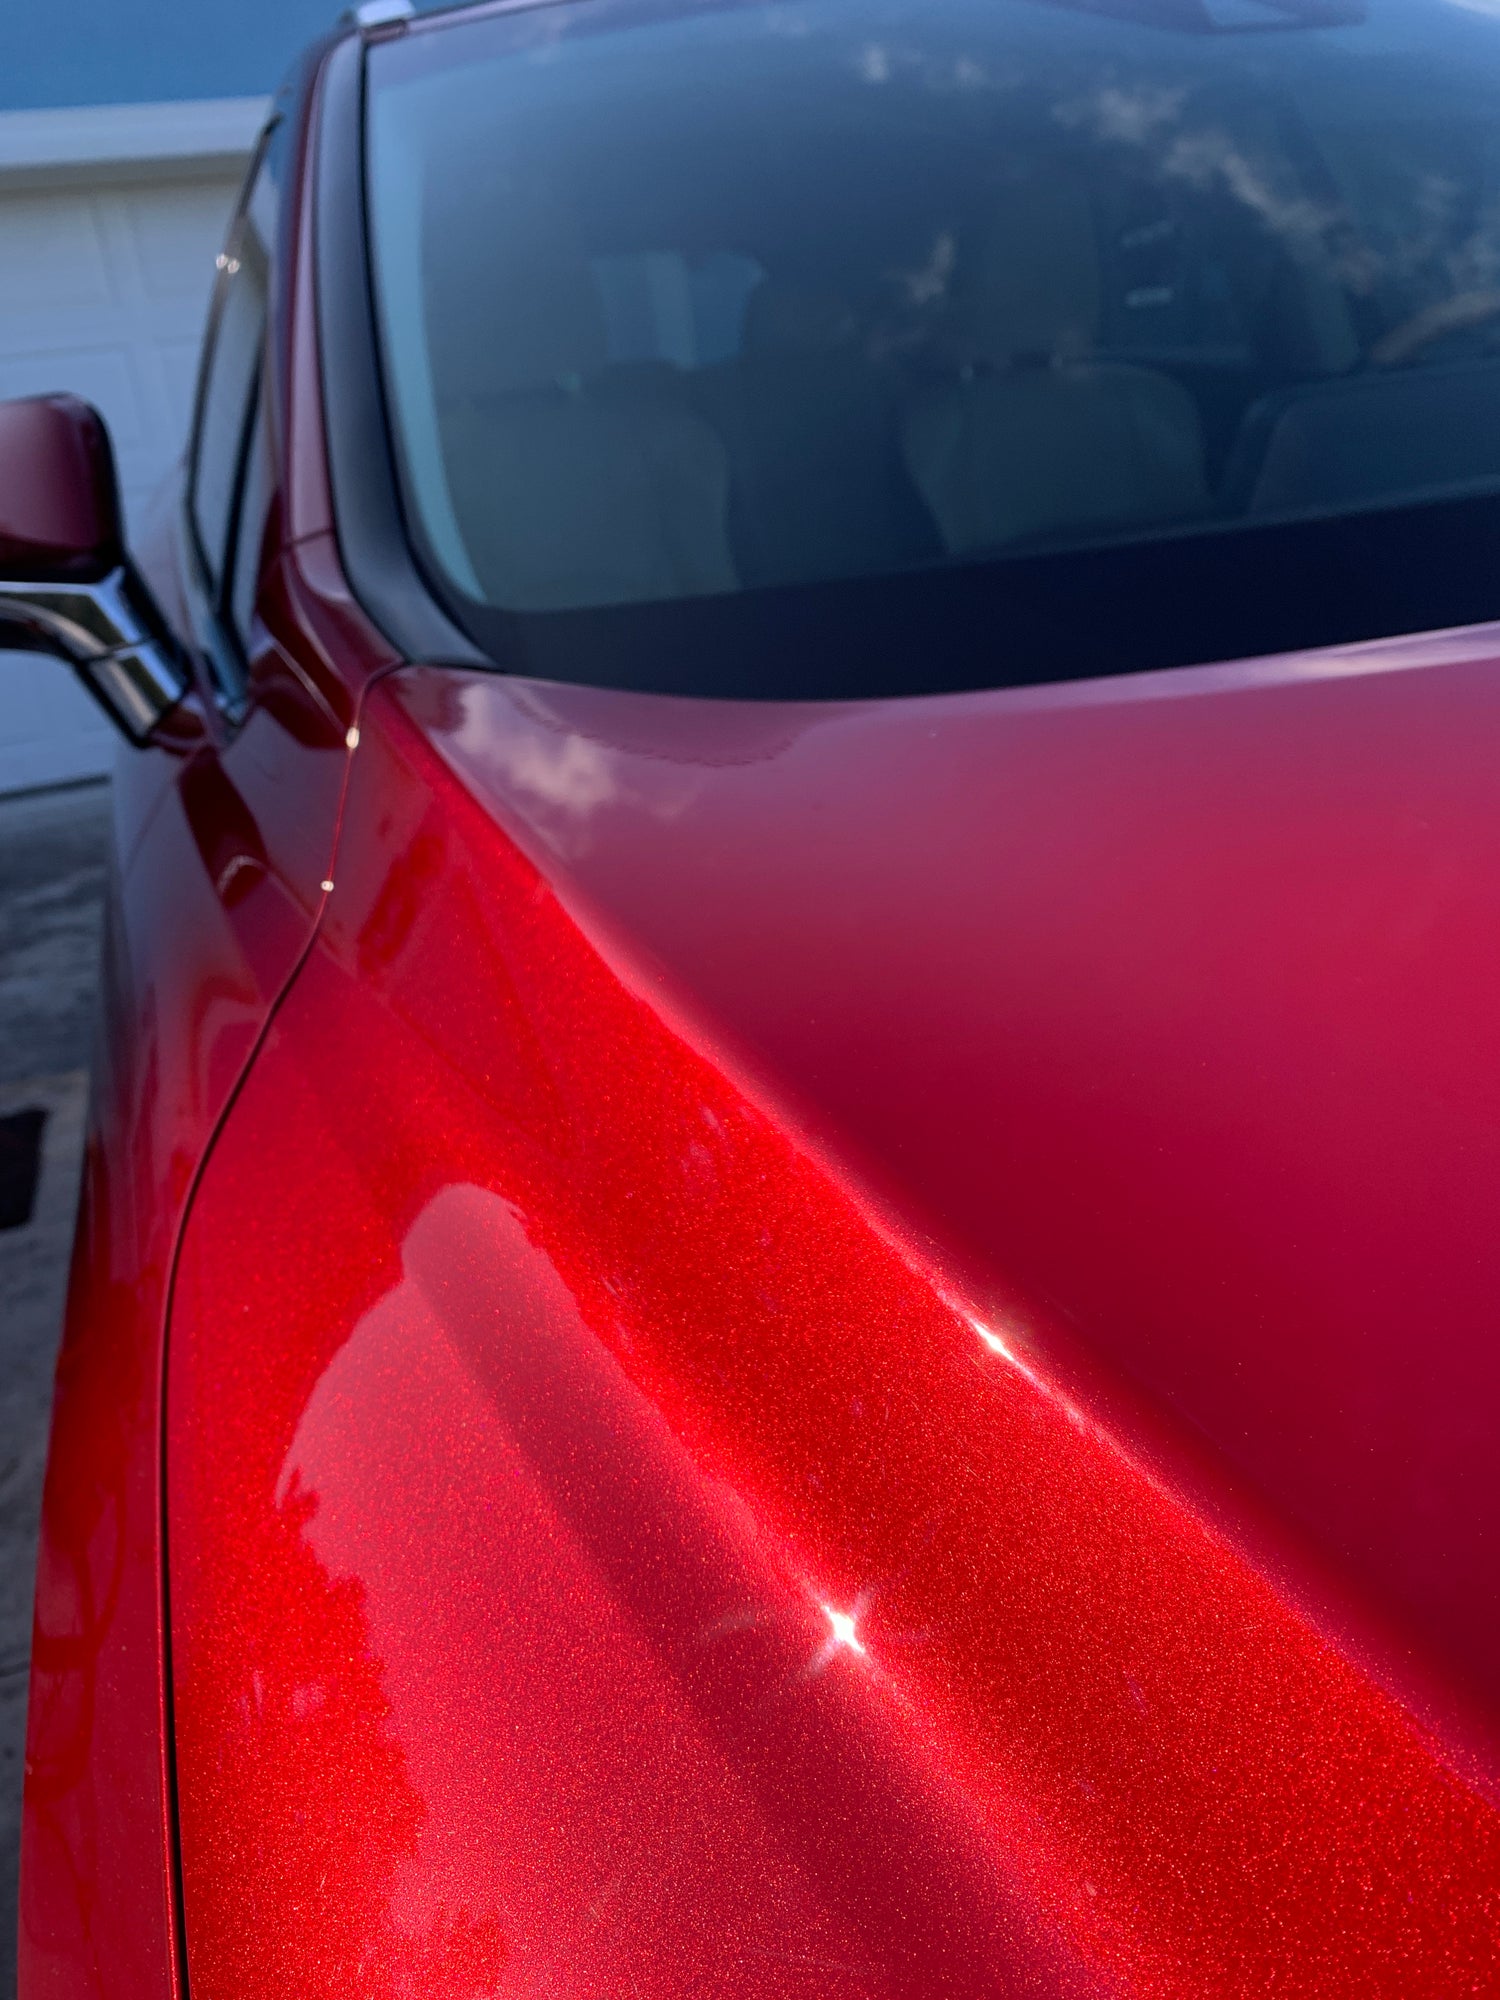 Professional paint correction: Reviving the car's showroom shine.